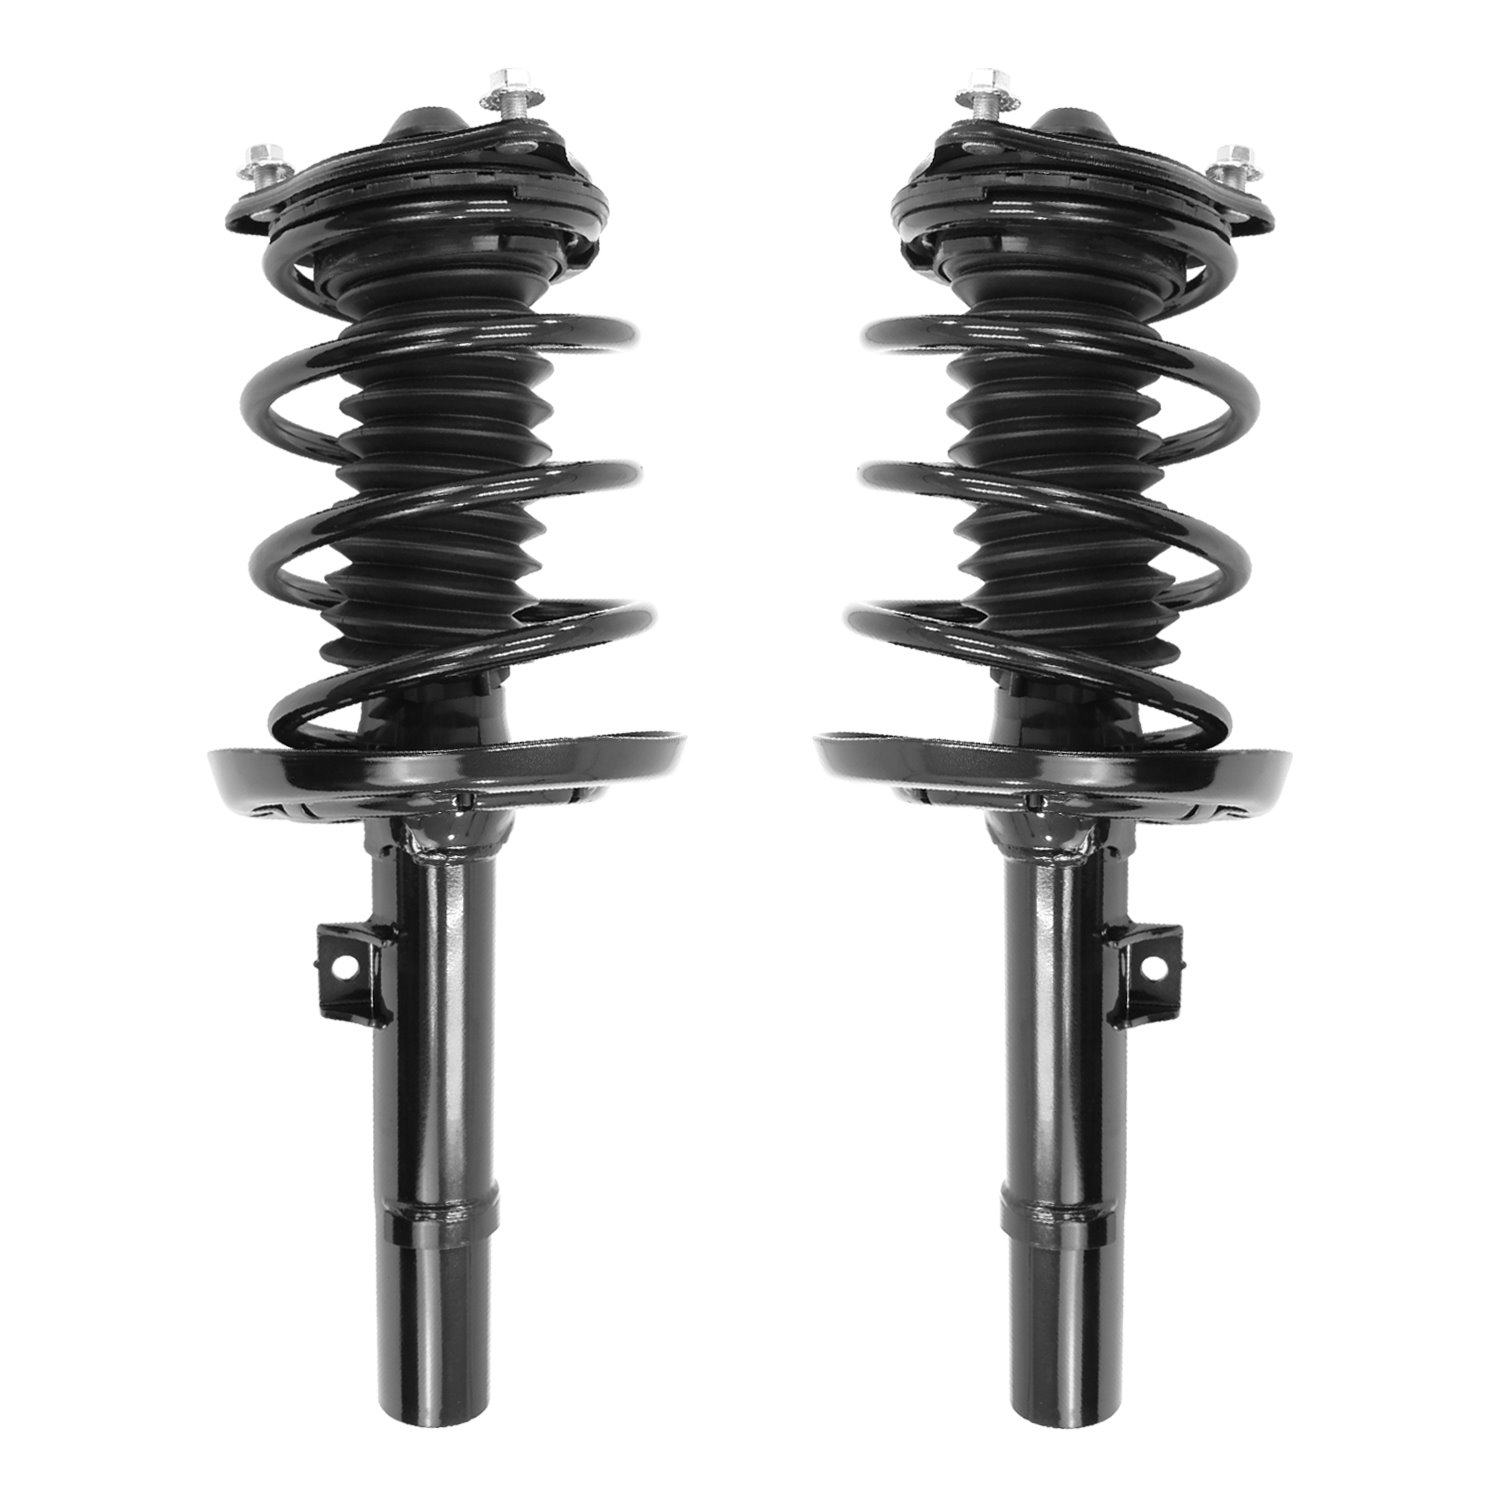 2-13571-13572-001 Front Suspension Strut & Coil Spring Assemby Set Fits Select Honda Civic